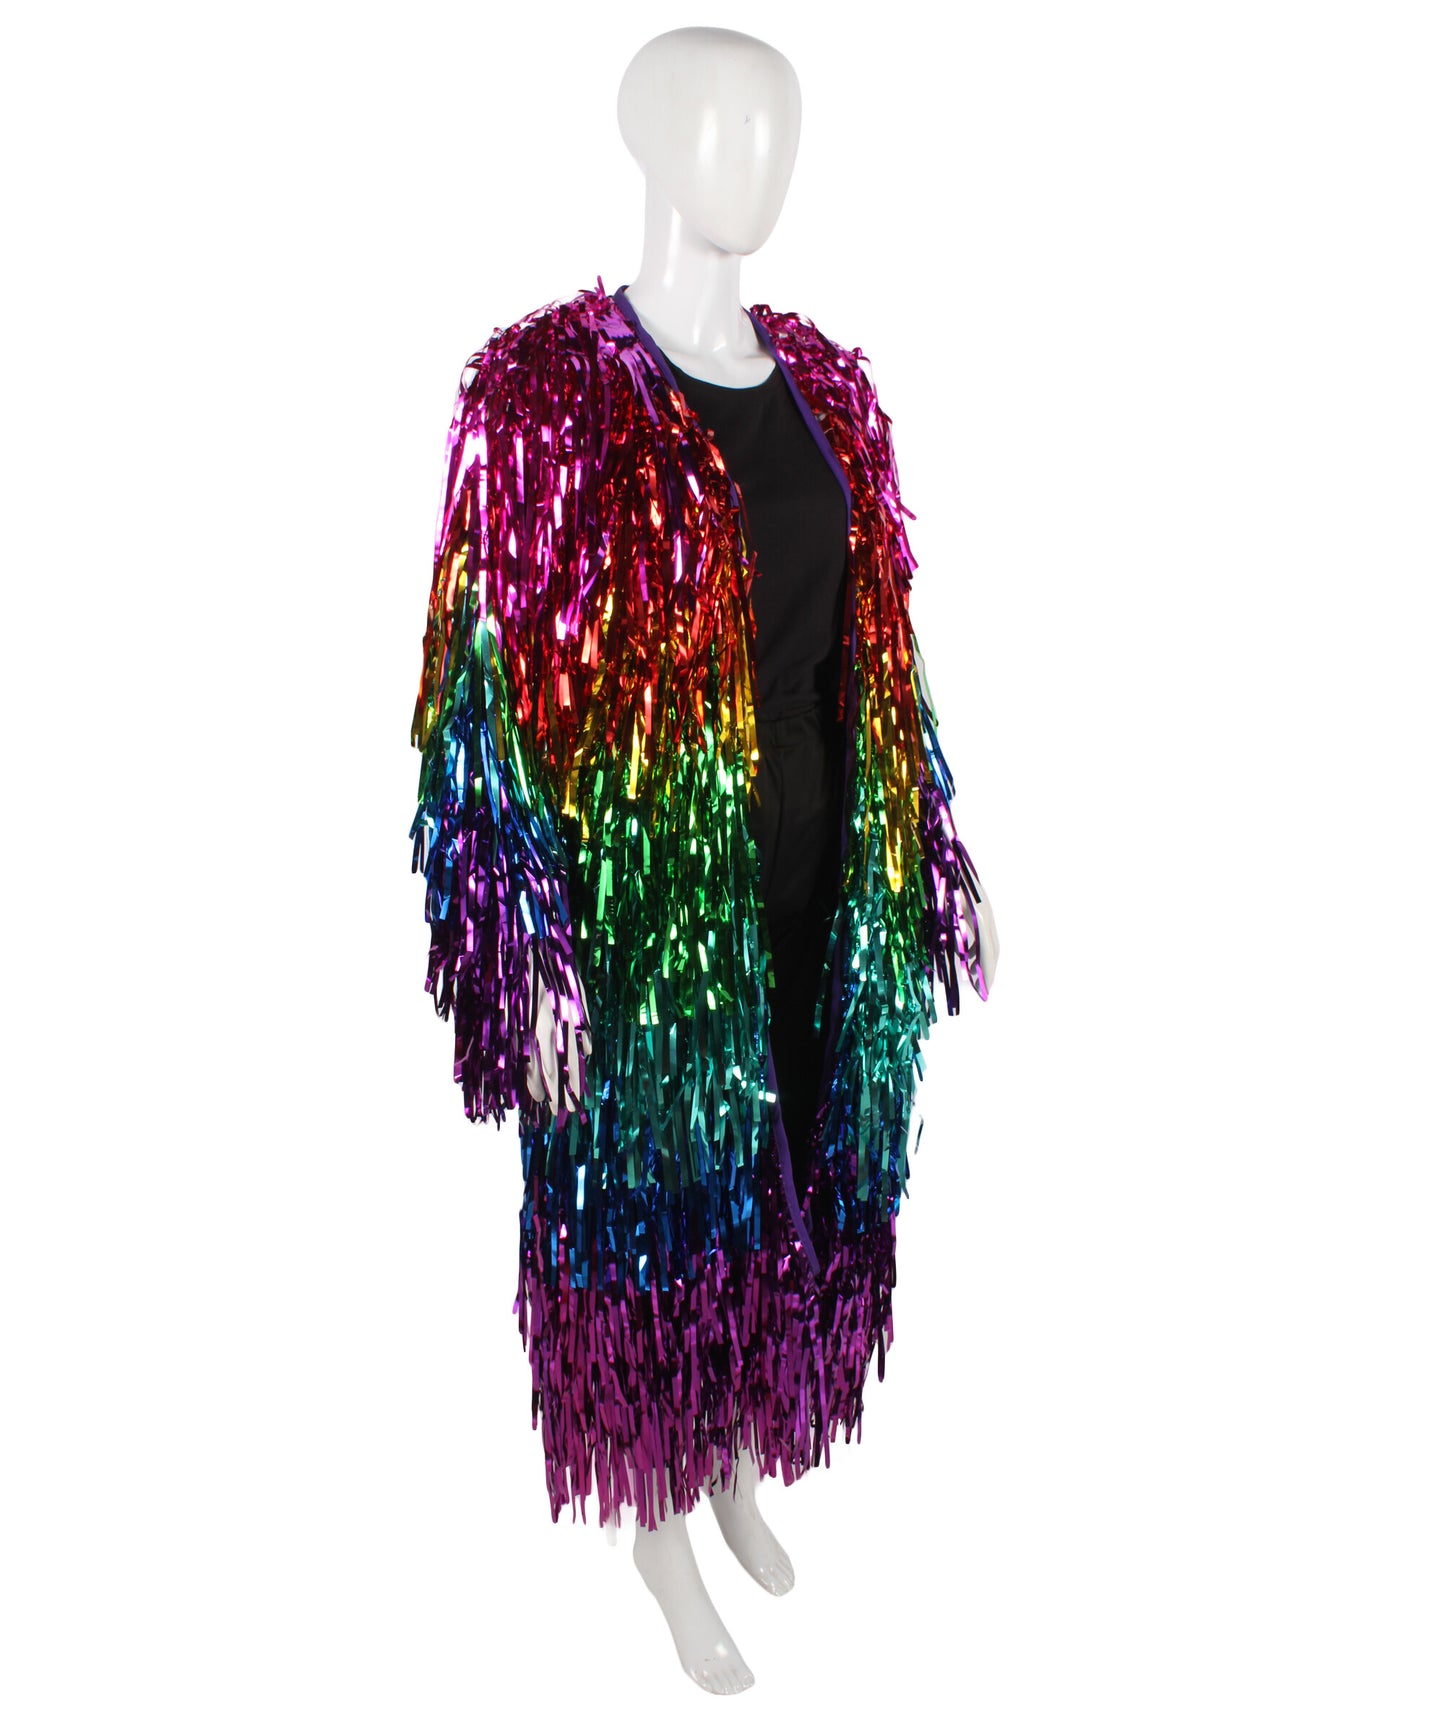 Rainbow and Glitter Ombre Tinsel Jacket